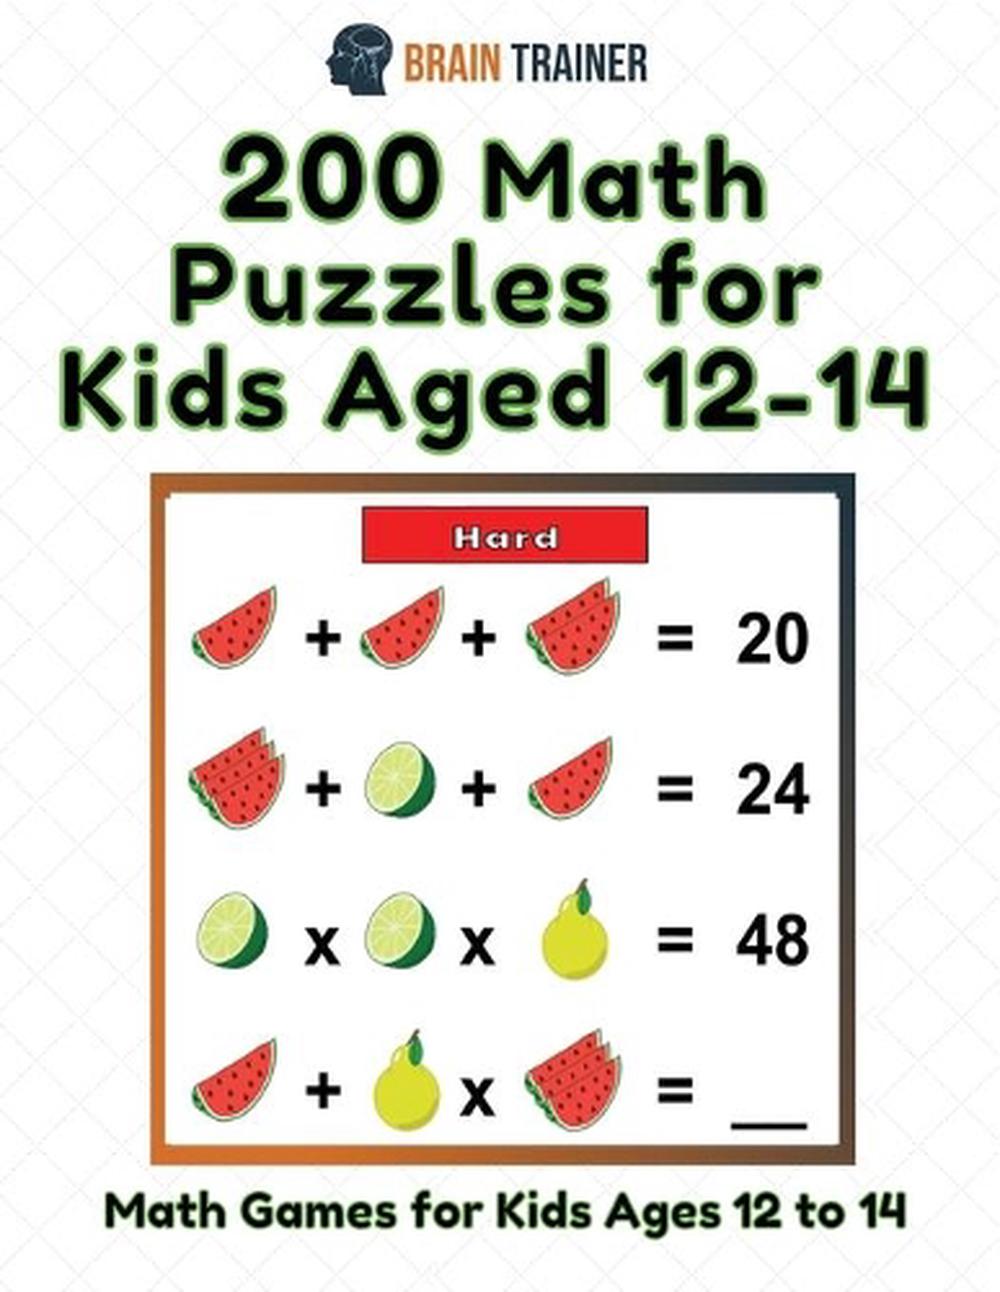 200-math-puzzles-for-kids-aged-12-14-math-games-for-kids-12-to-14-by-trainer-b-ebay